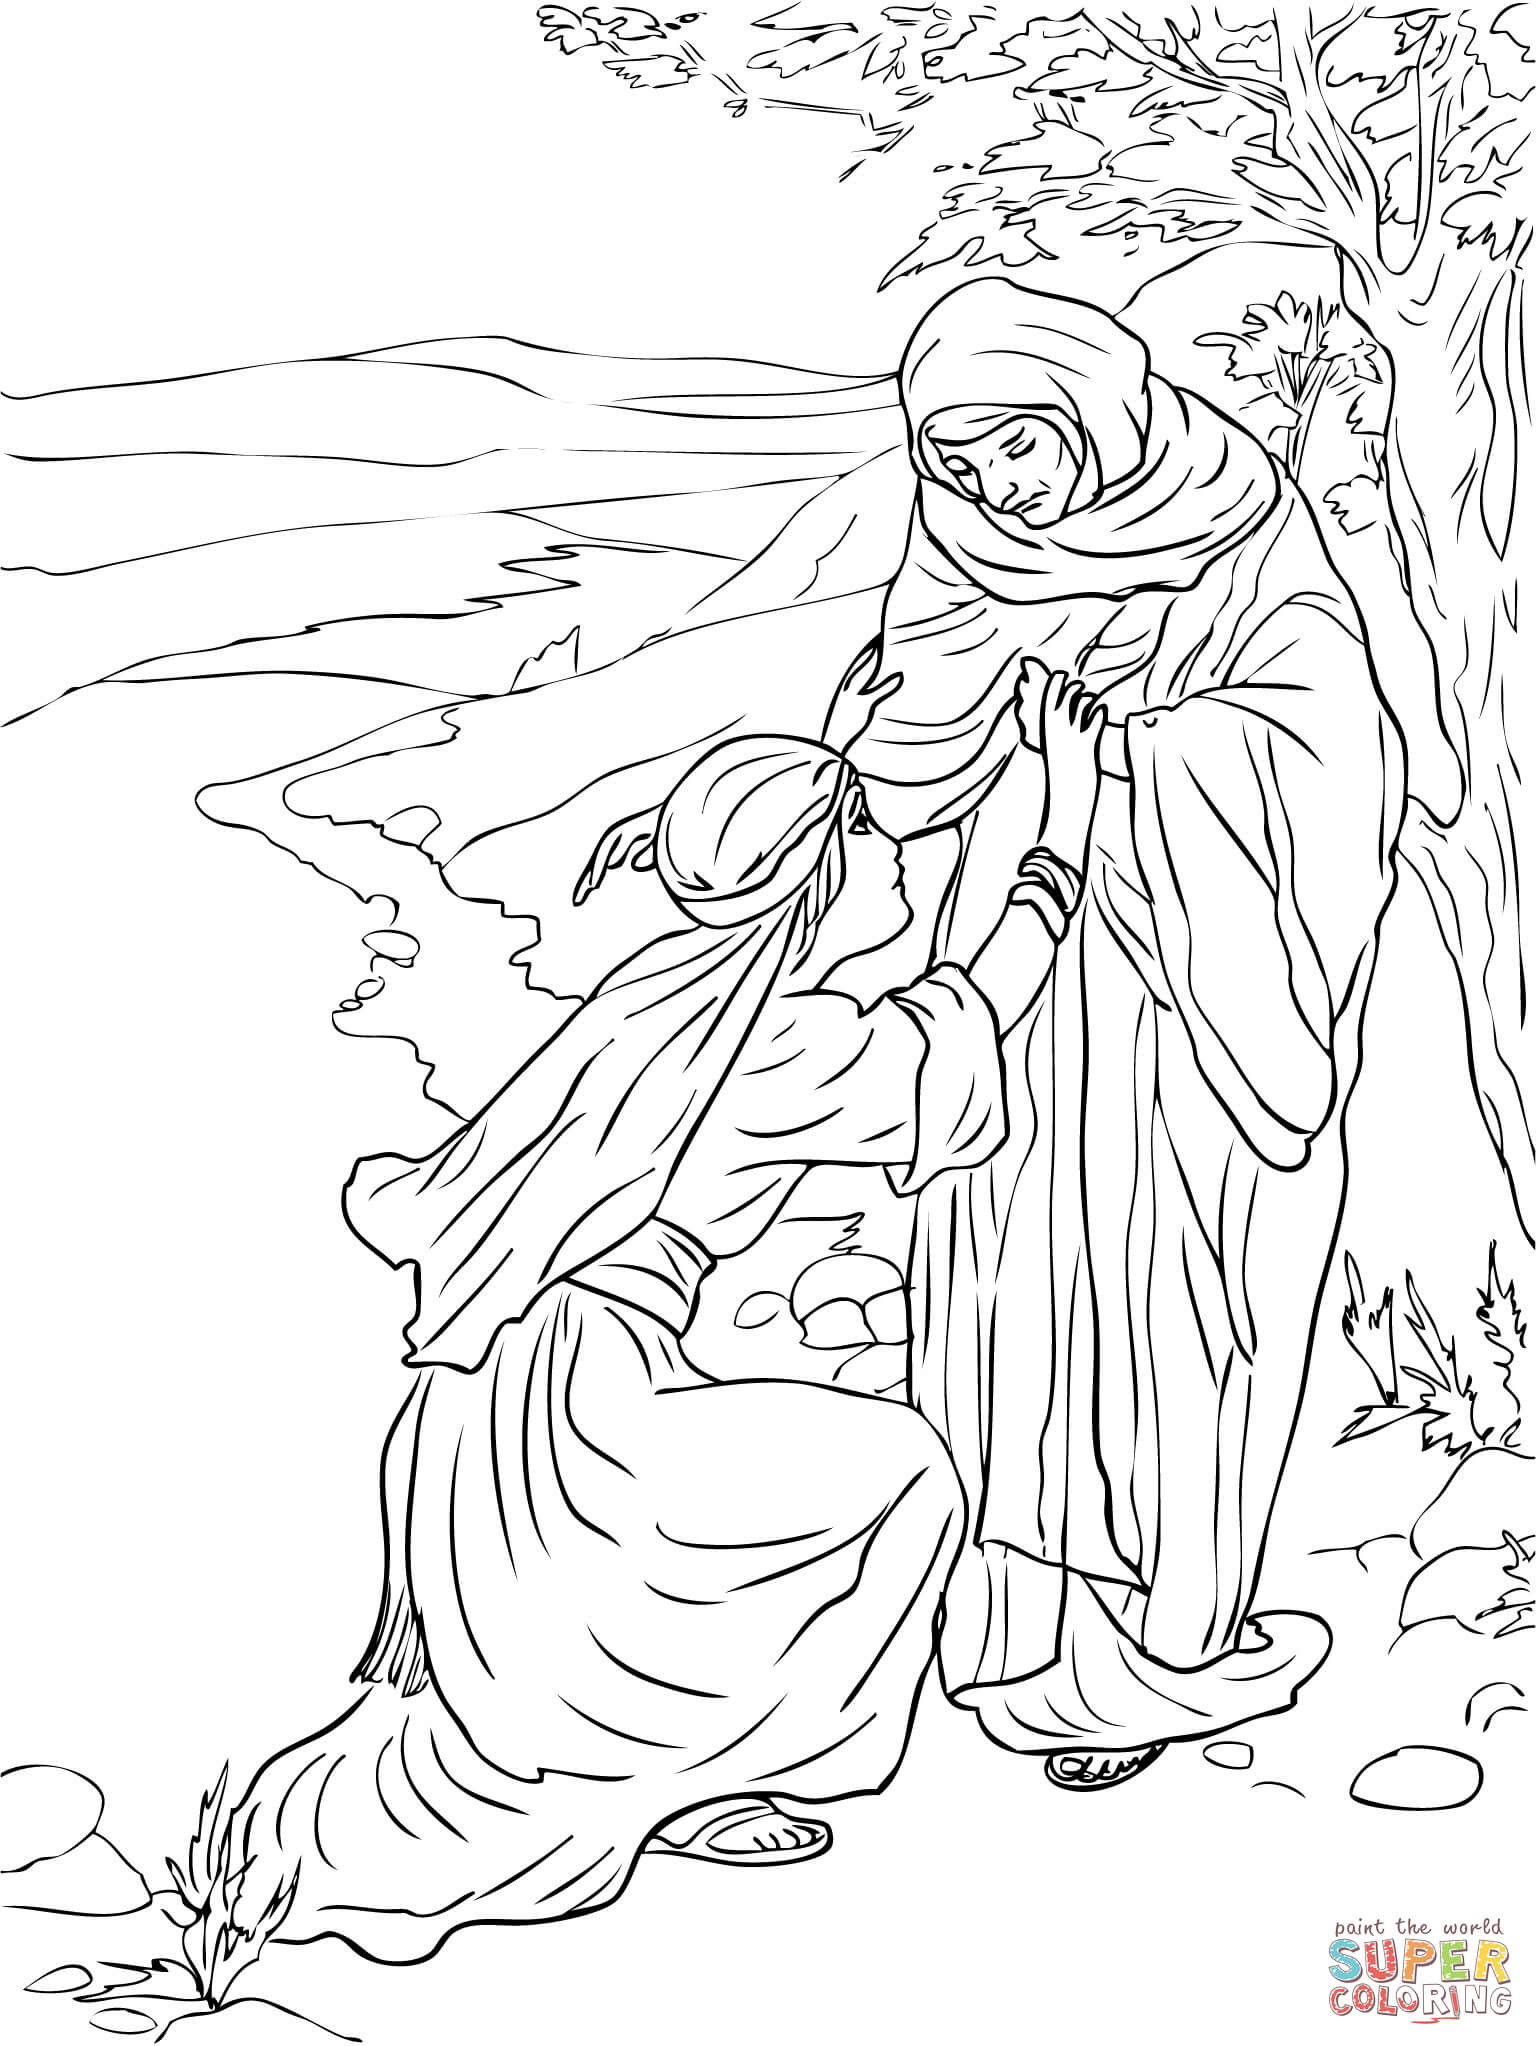 Coloring Pages For Children On The Story Of Ruth And Naomi
 Ruth And Naomi Coloring Pages Kidsuki